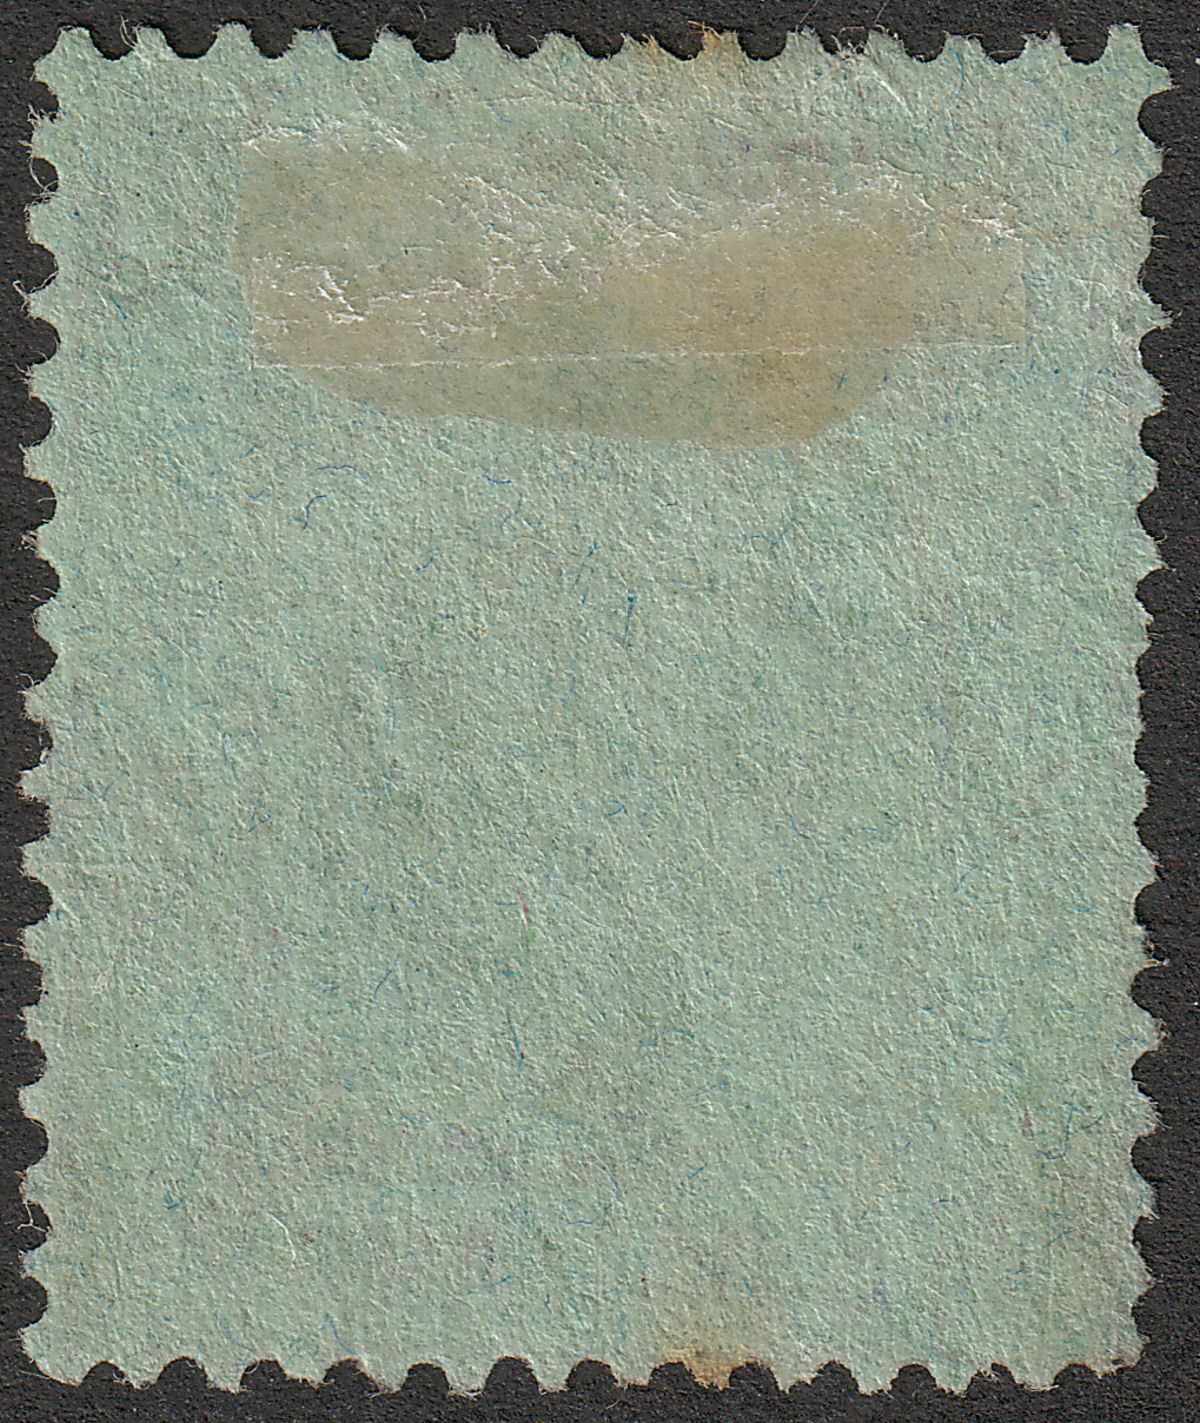 Hong Kong 1925 KGV $5 Green and Red on Emerald Used SG132 cat £80 small faults